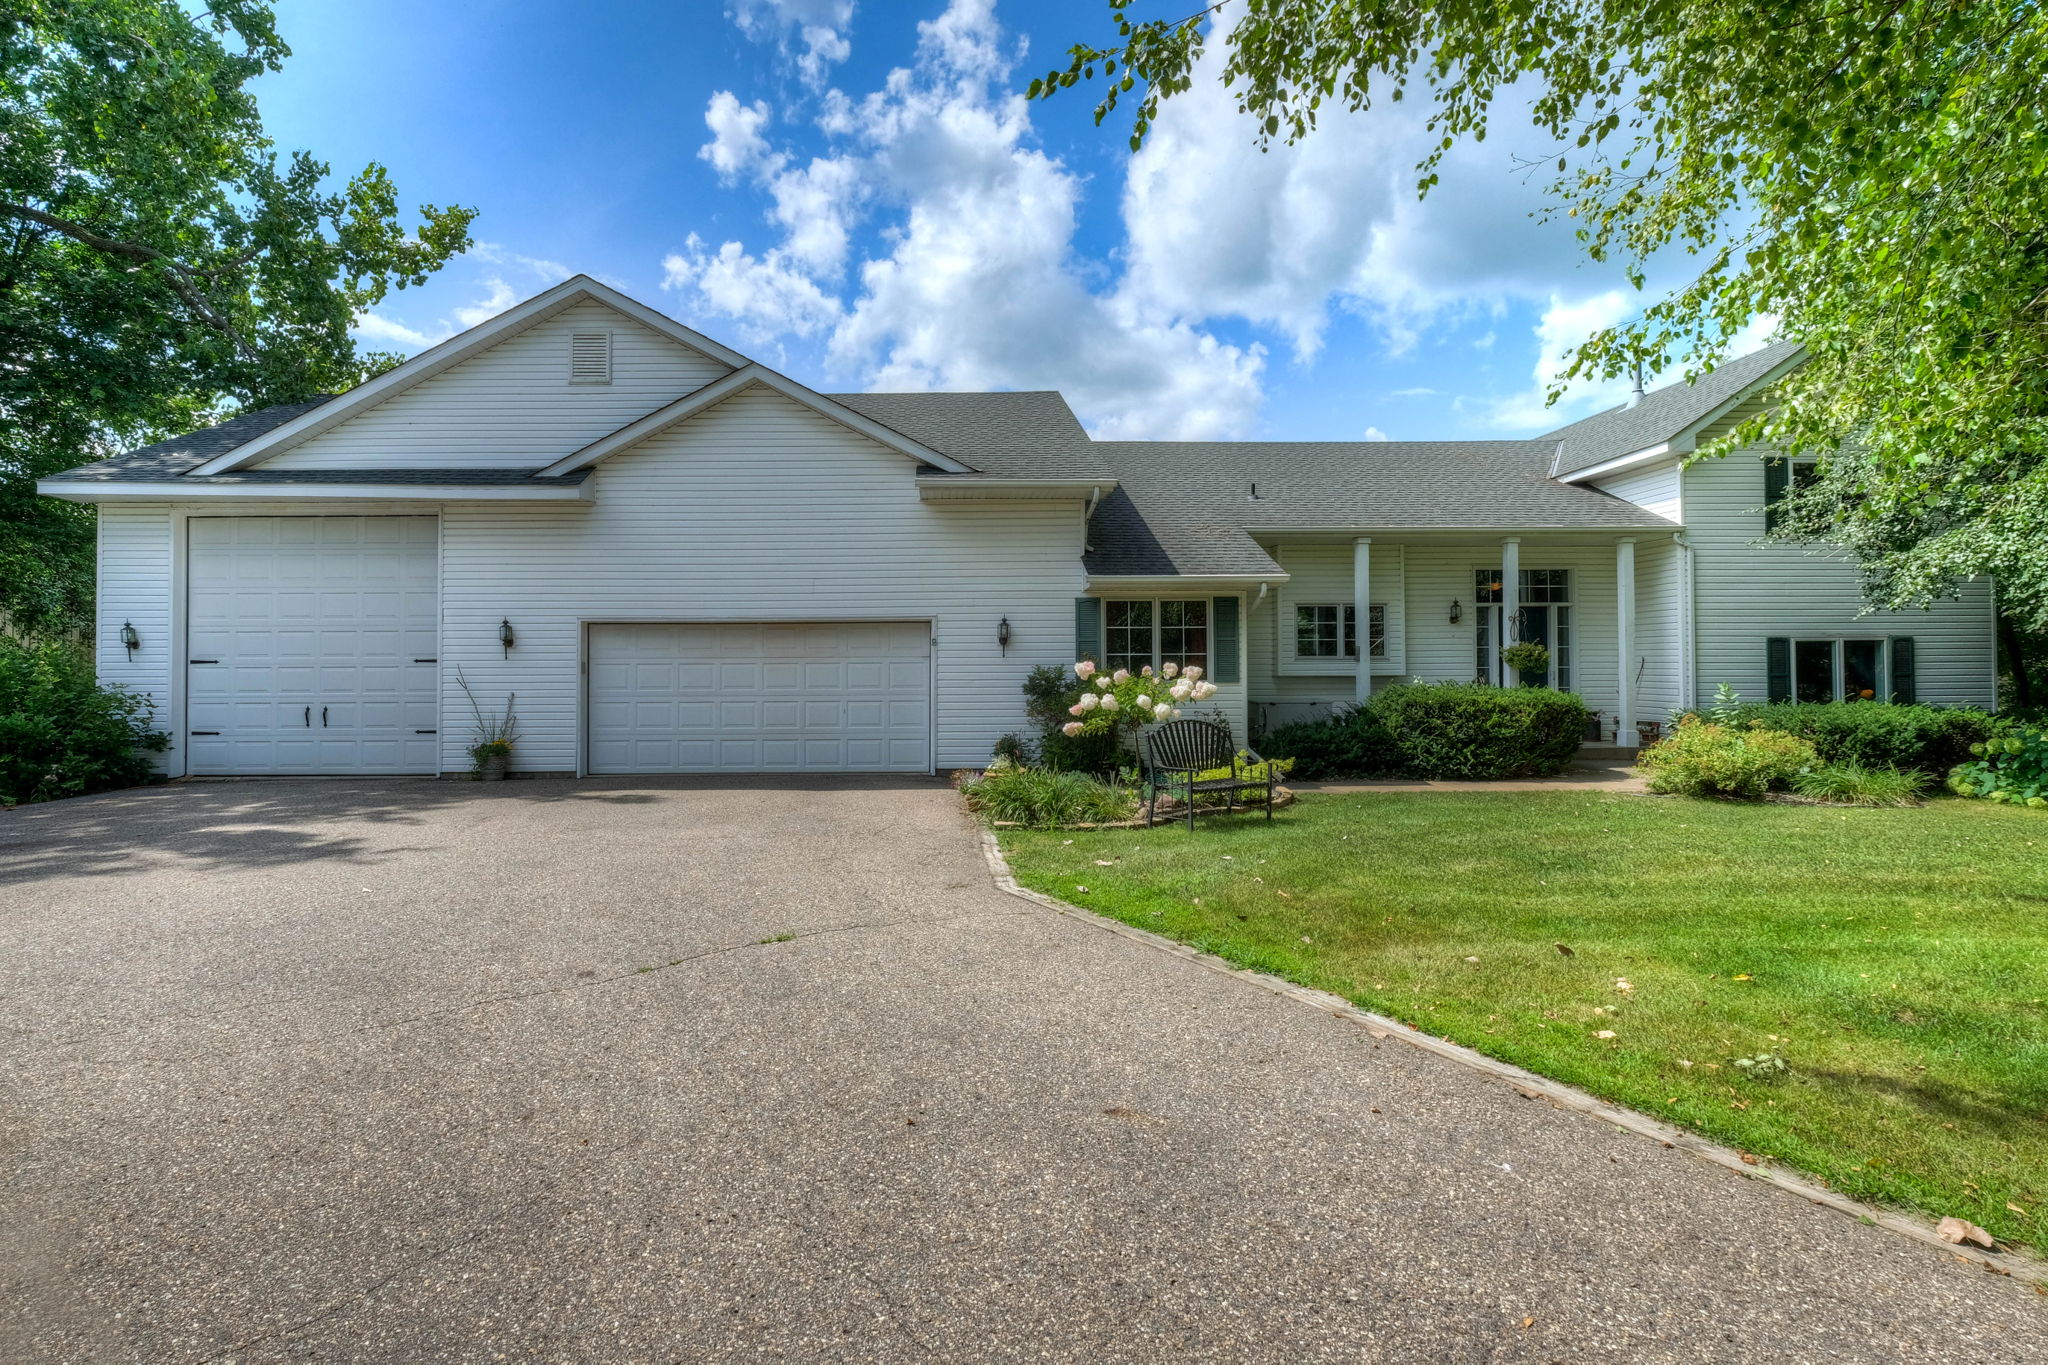  4352 Chester Court, Webster, MN 55088, US